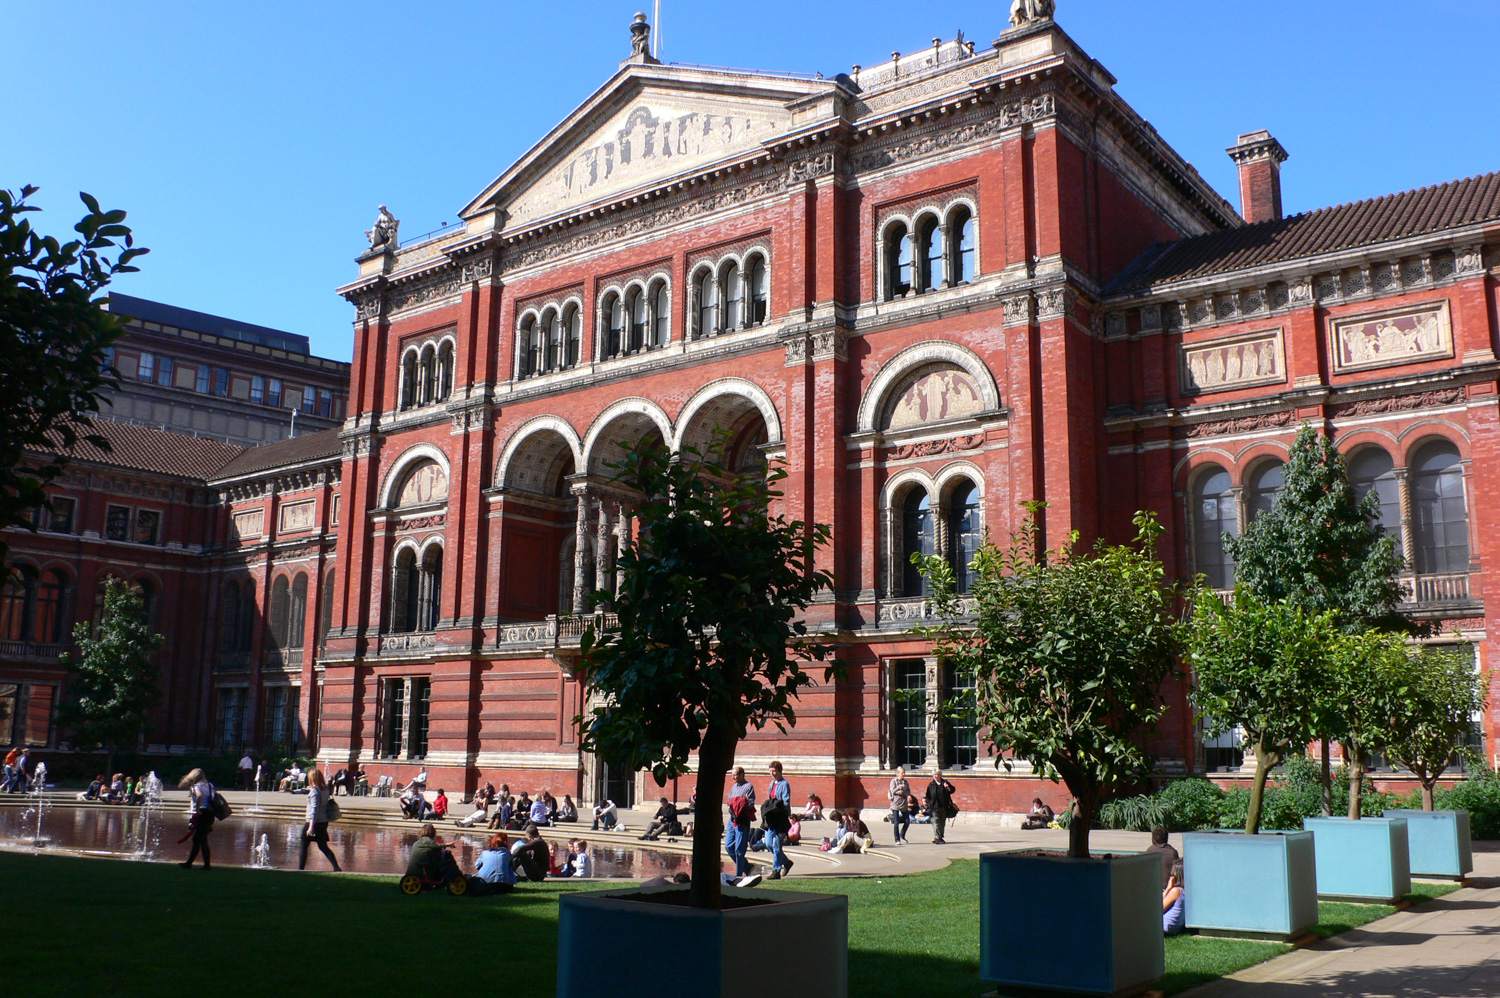 Courtyard at the V & A museum